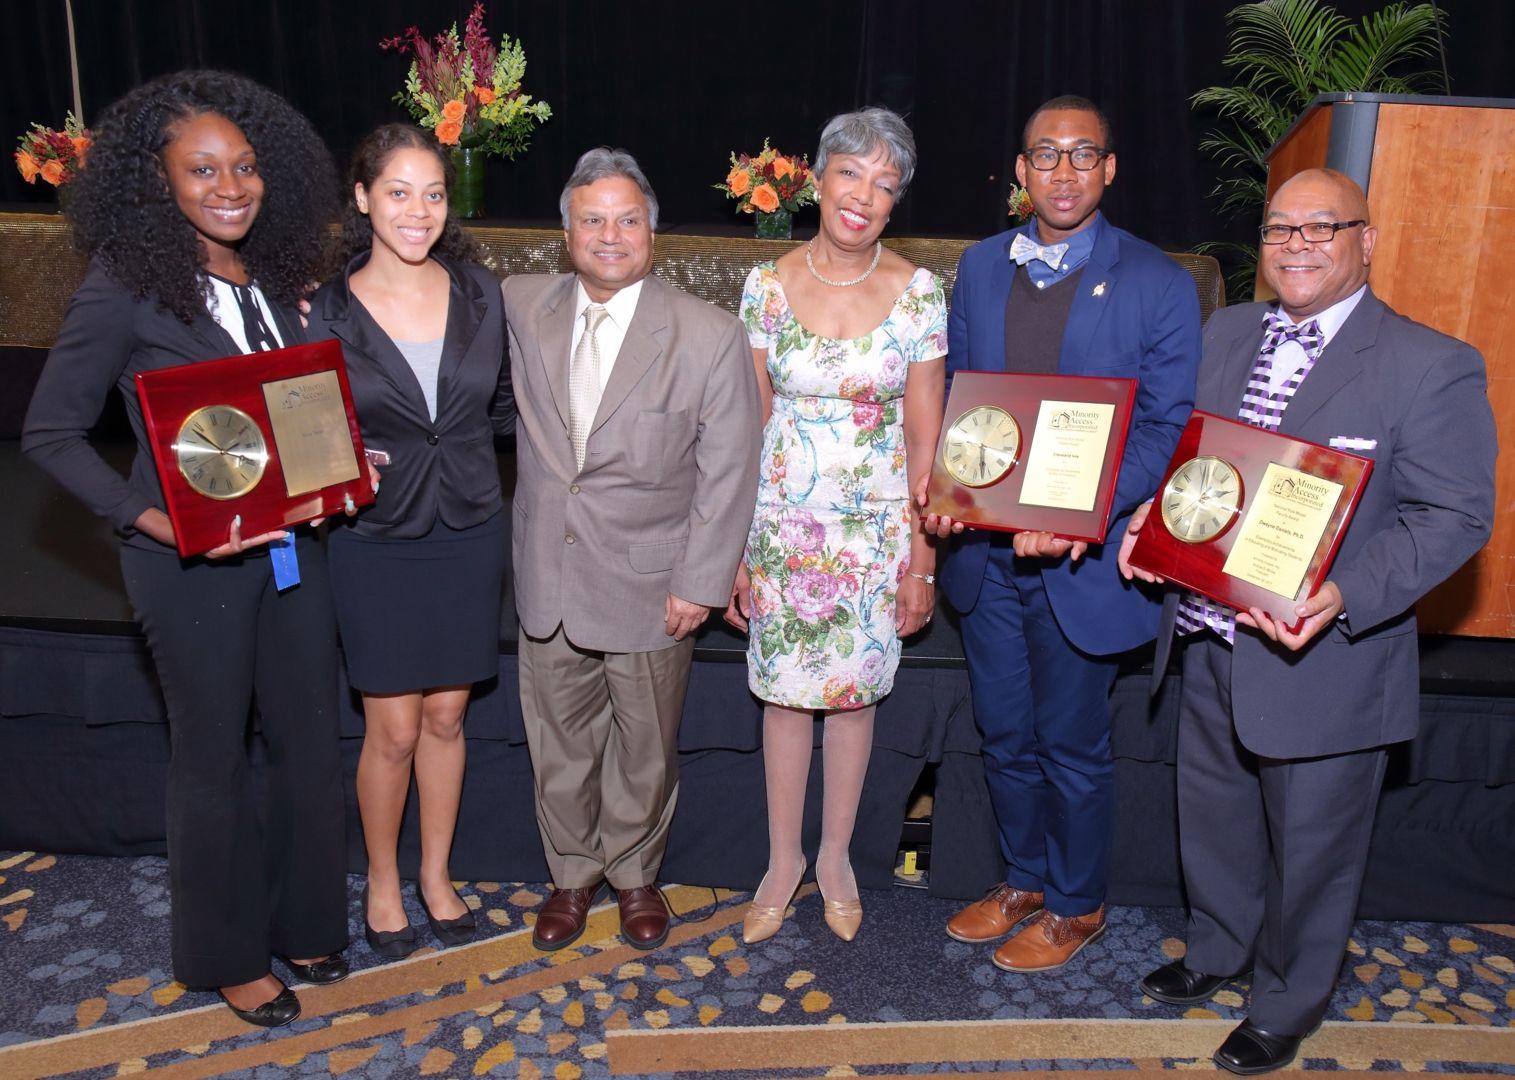 Fort Valley State University seniors Xavia Taylor (first from left) and Cleveland Ivey (second from right) recently received the National Role Model Award by Minority Access Inc. during a conference in Washington D.C. FVSU chemistry professor Dr. Dwayne Daniels (first from right) also received the National Role Model Award for faculty.